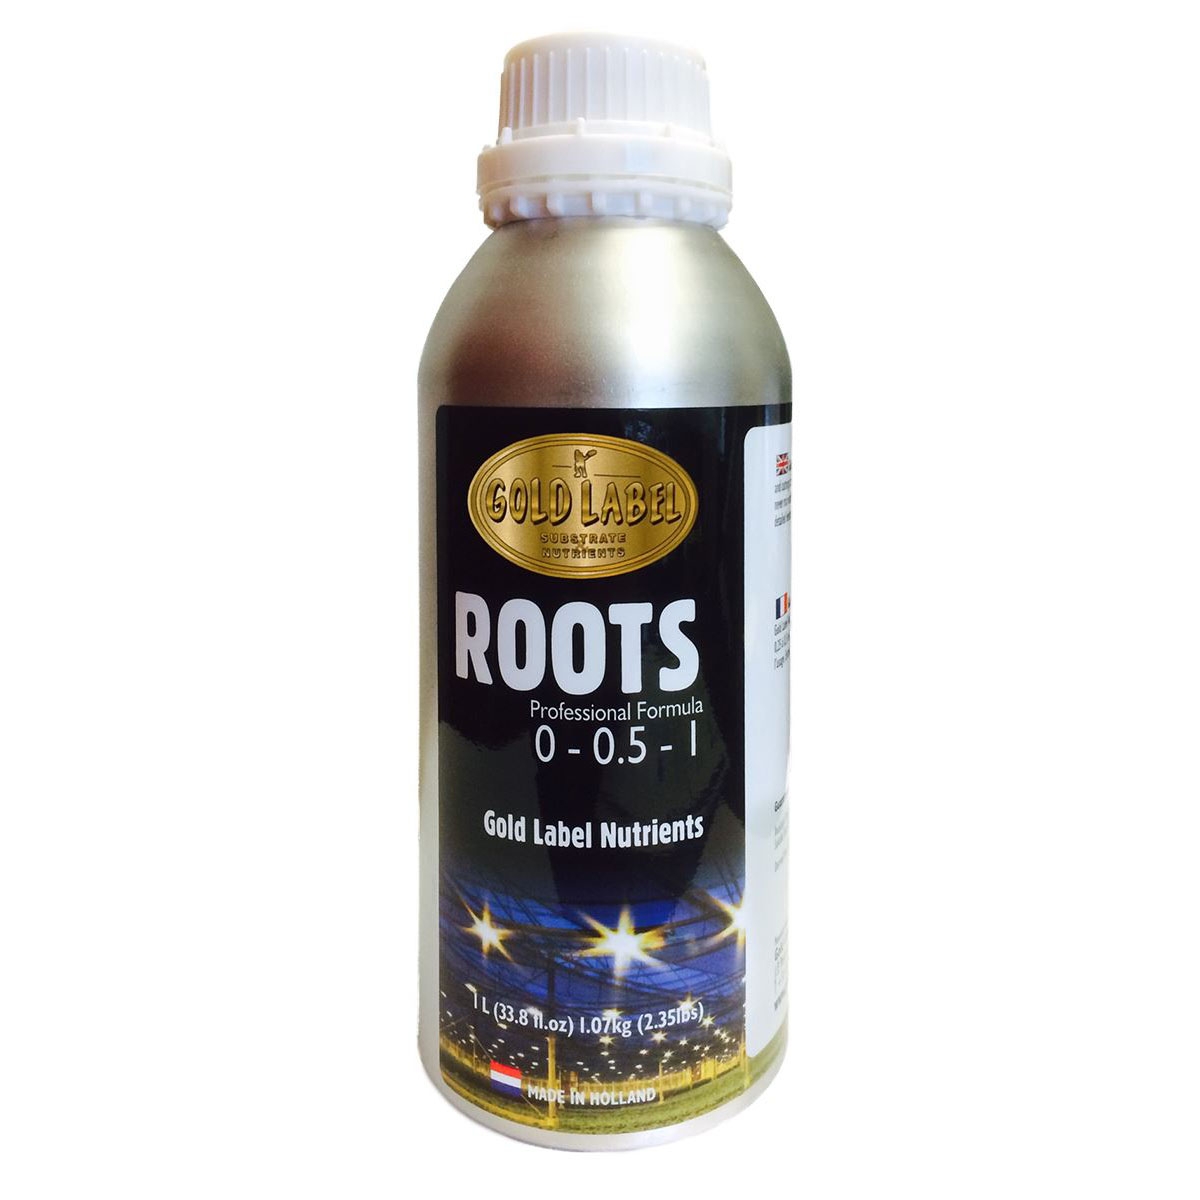 Roots by 